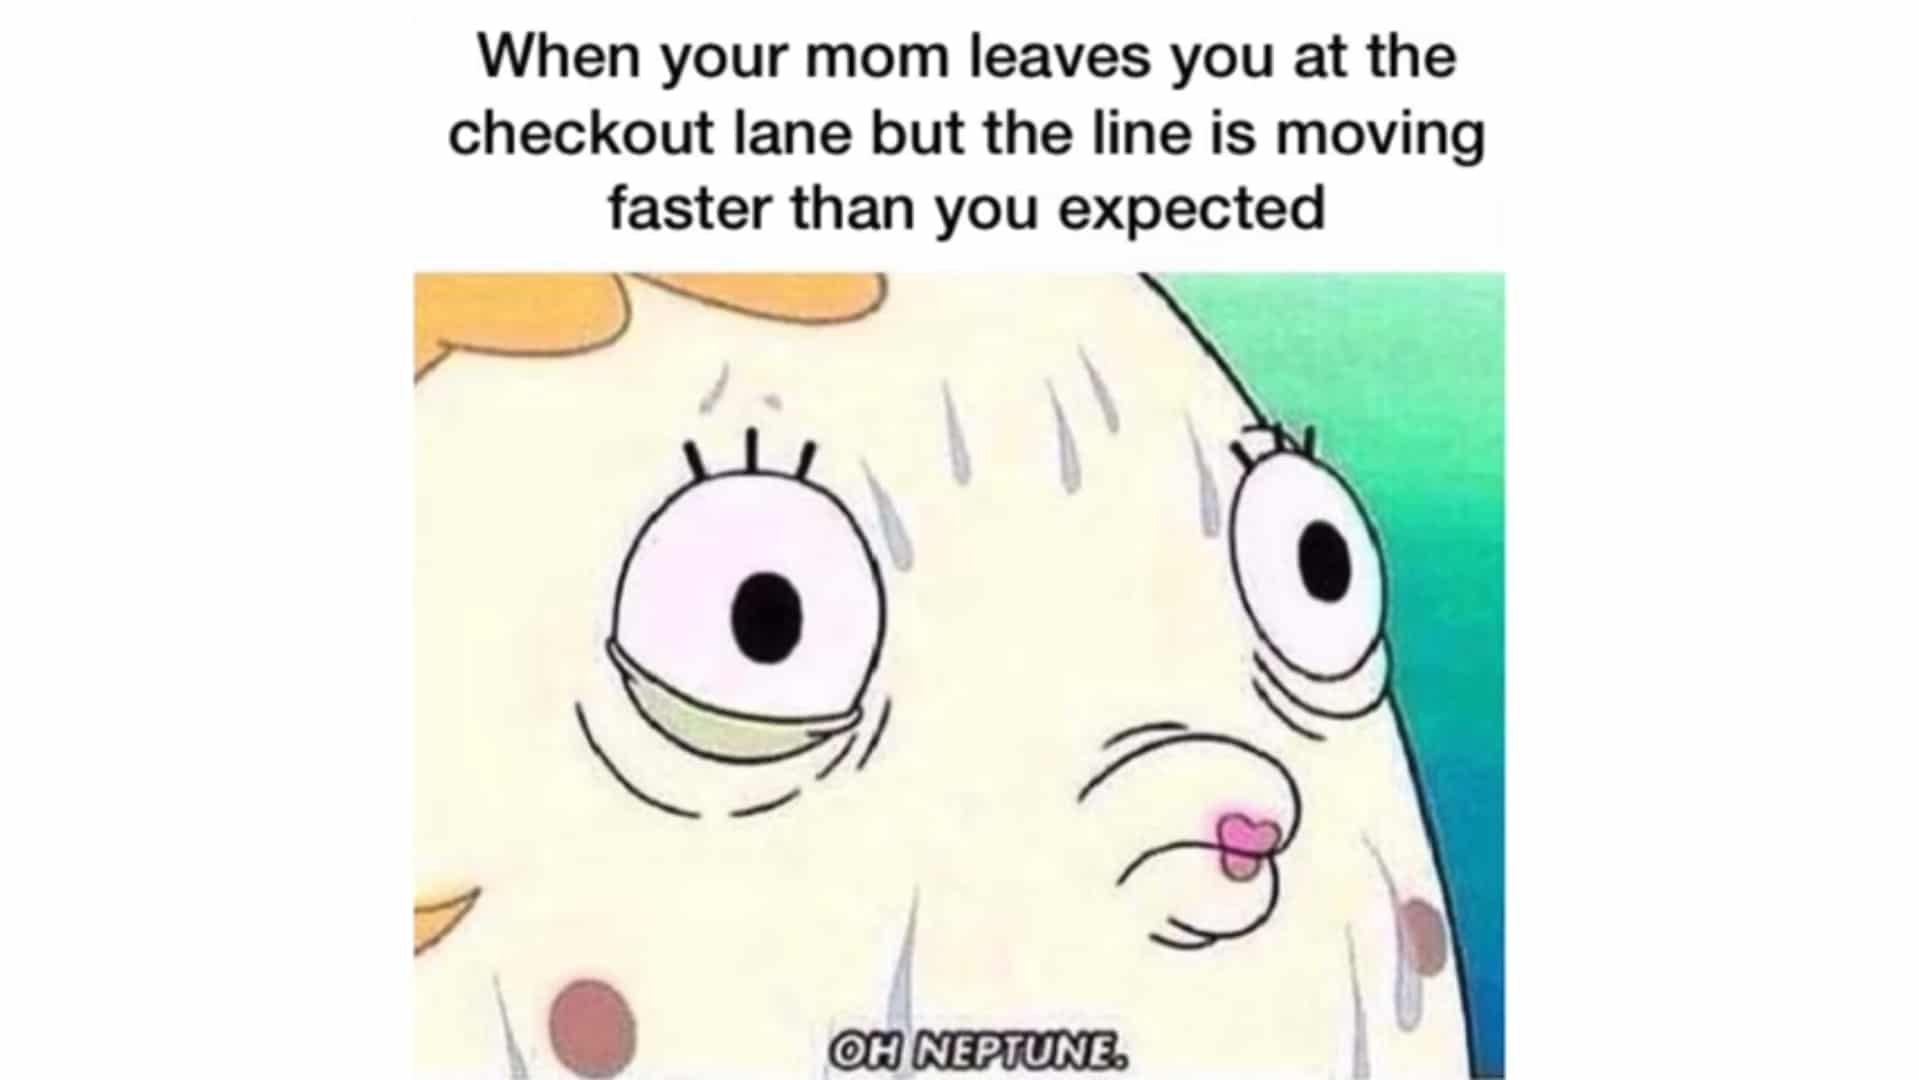 spongebob spongebob-memes spongebob text: When your mom leaves you at the checkout lane but the line is moving faster than you expected OH NEPTUNE 